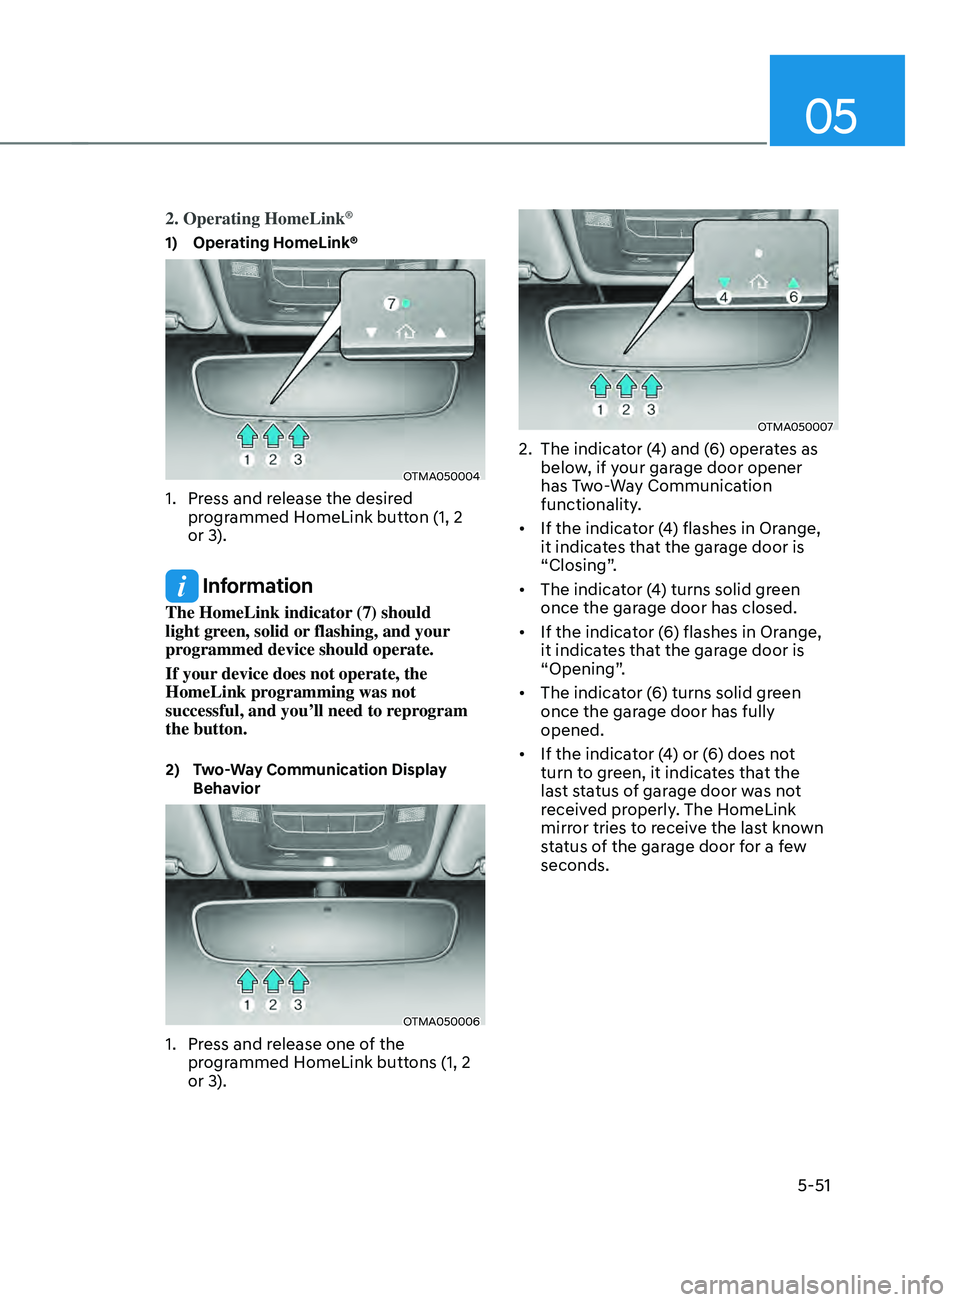 HYUNDAI SANTA FE 2021  Owners Manual 05
5-51
2. Operating HomeLink®
1) Operating HomeLink®
OTMA050004
1. Press and release the desired 
programmed HomeLink button (1, 2 
or 3).
 Information
The HomeLink indicator (7) should 
light gree